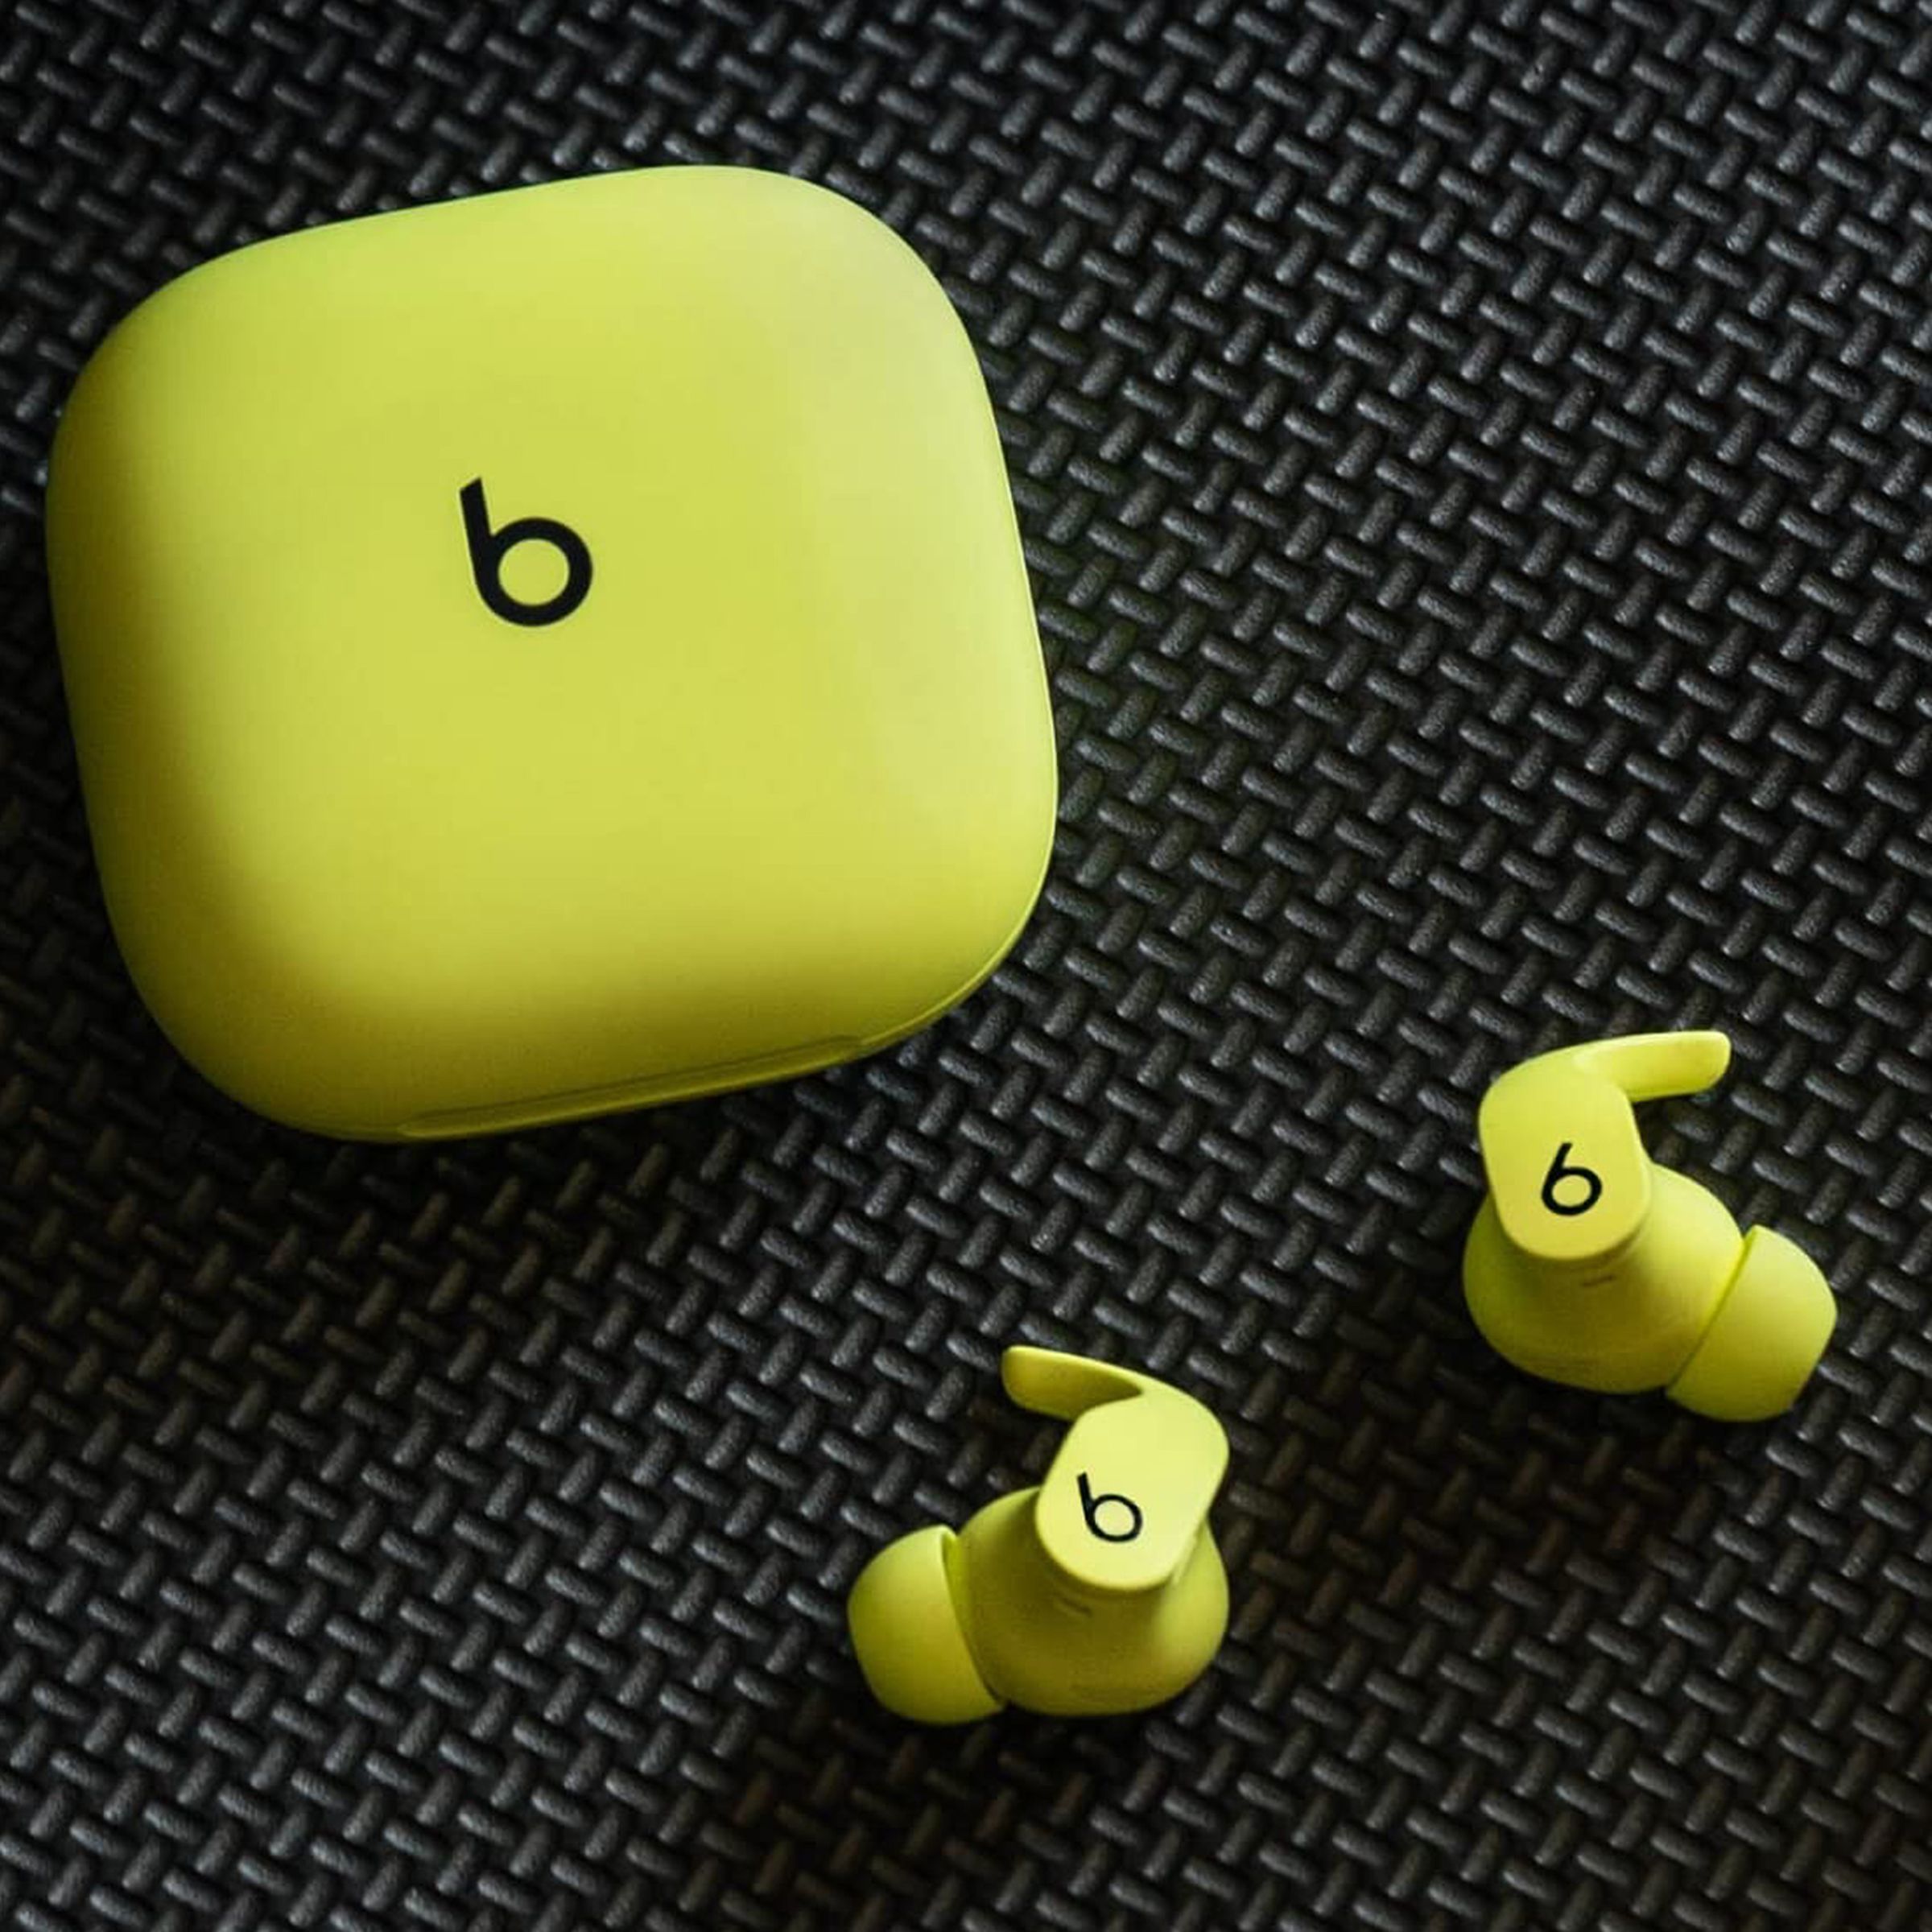 The bright yellow version of the Beats Fit Pro earbuds and their matching case resting on a black mesh pattern.